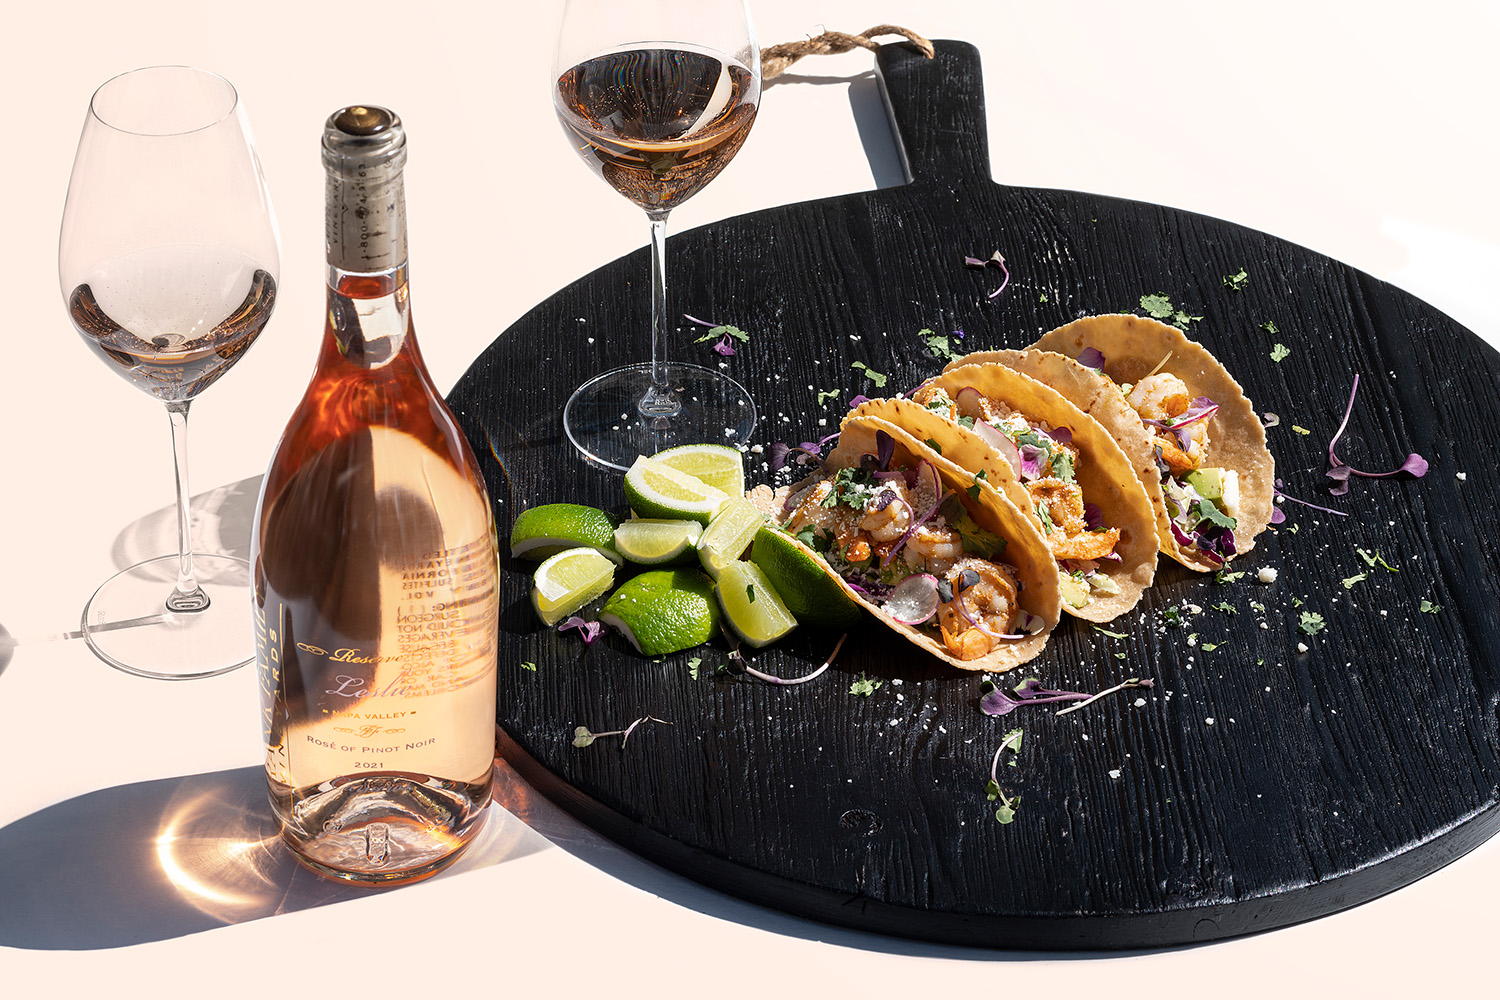 A bottle of Frank Family's Leslie Rosé next to a wine glass and plate of shrimp tacos